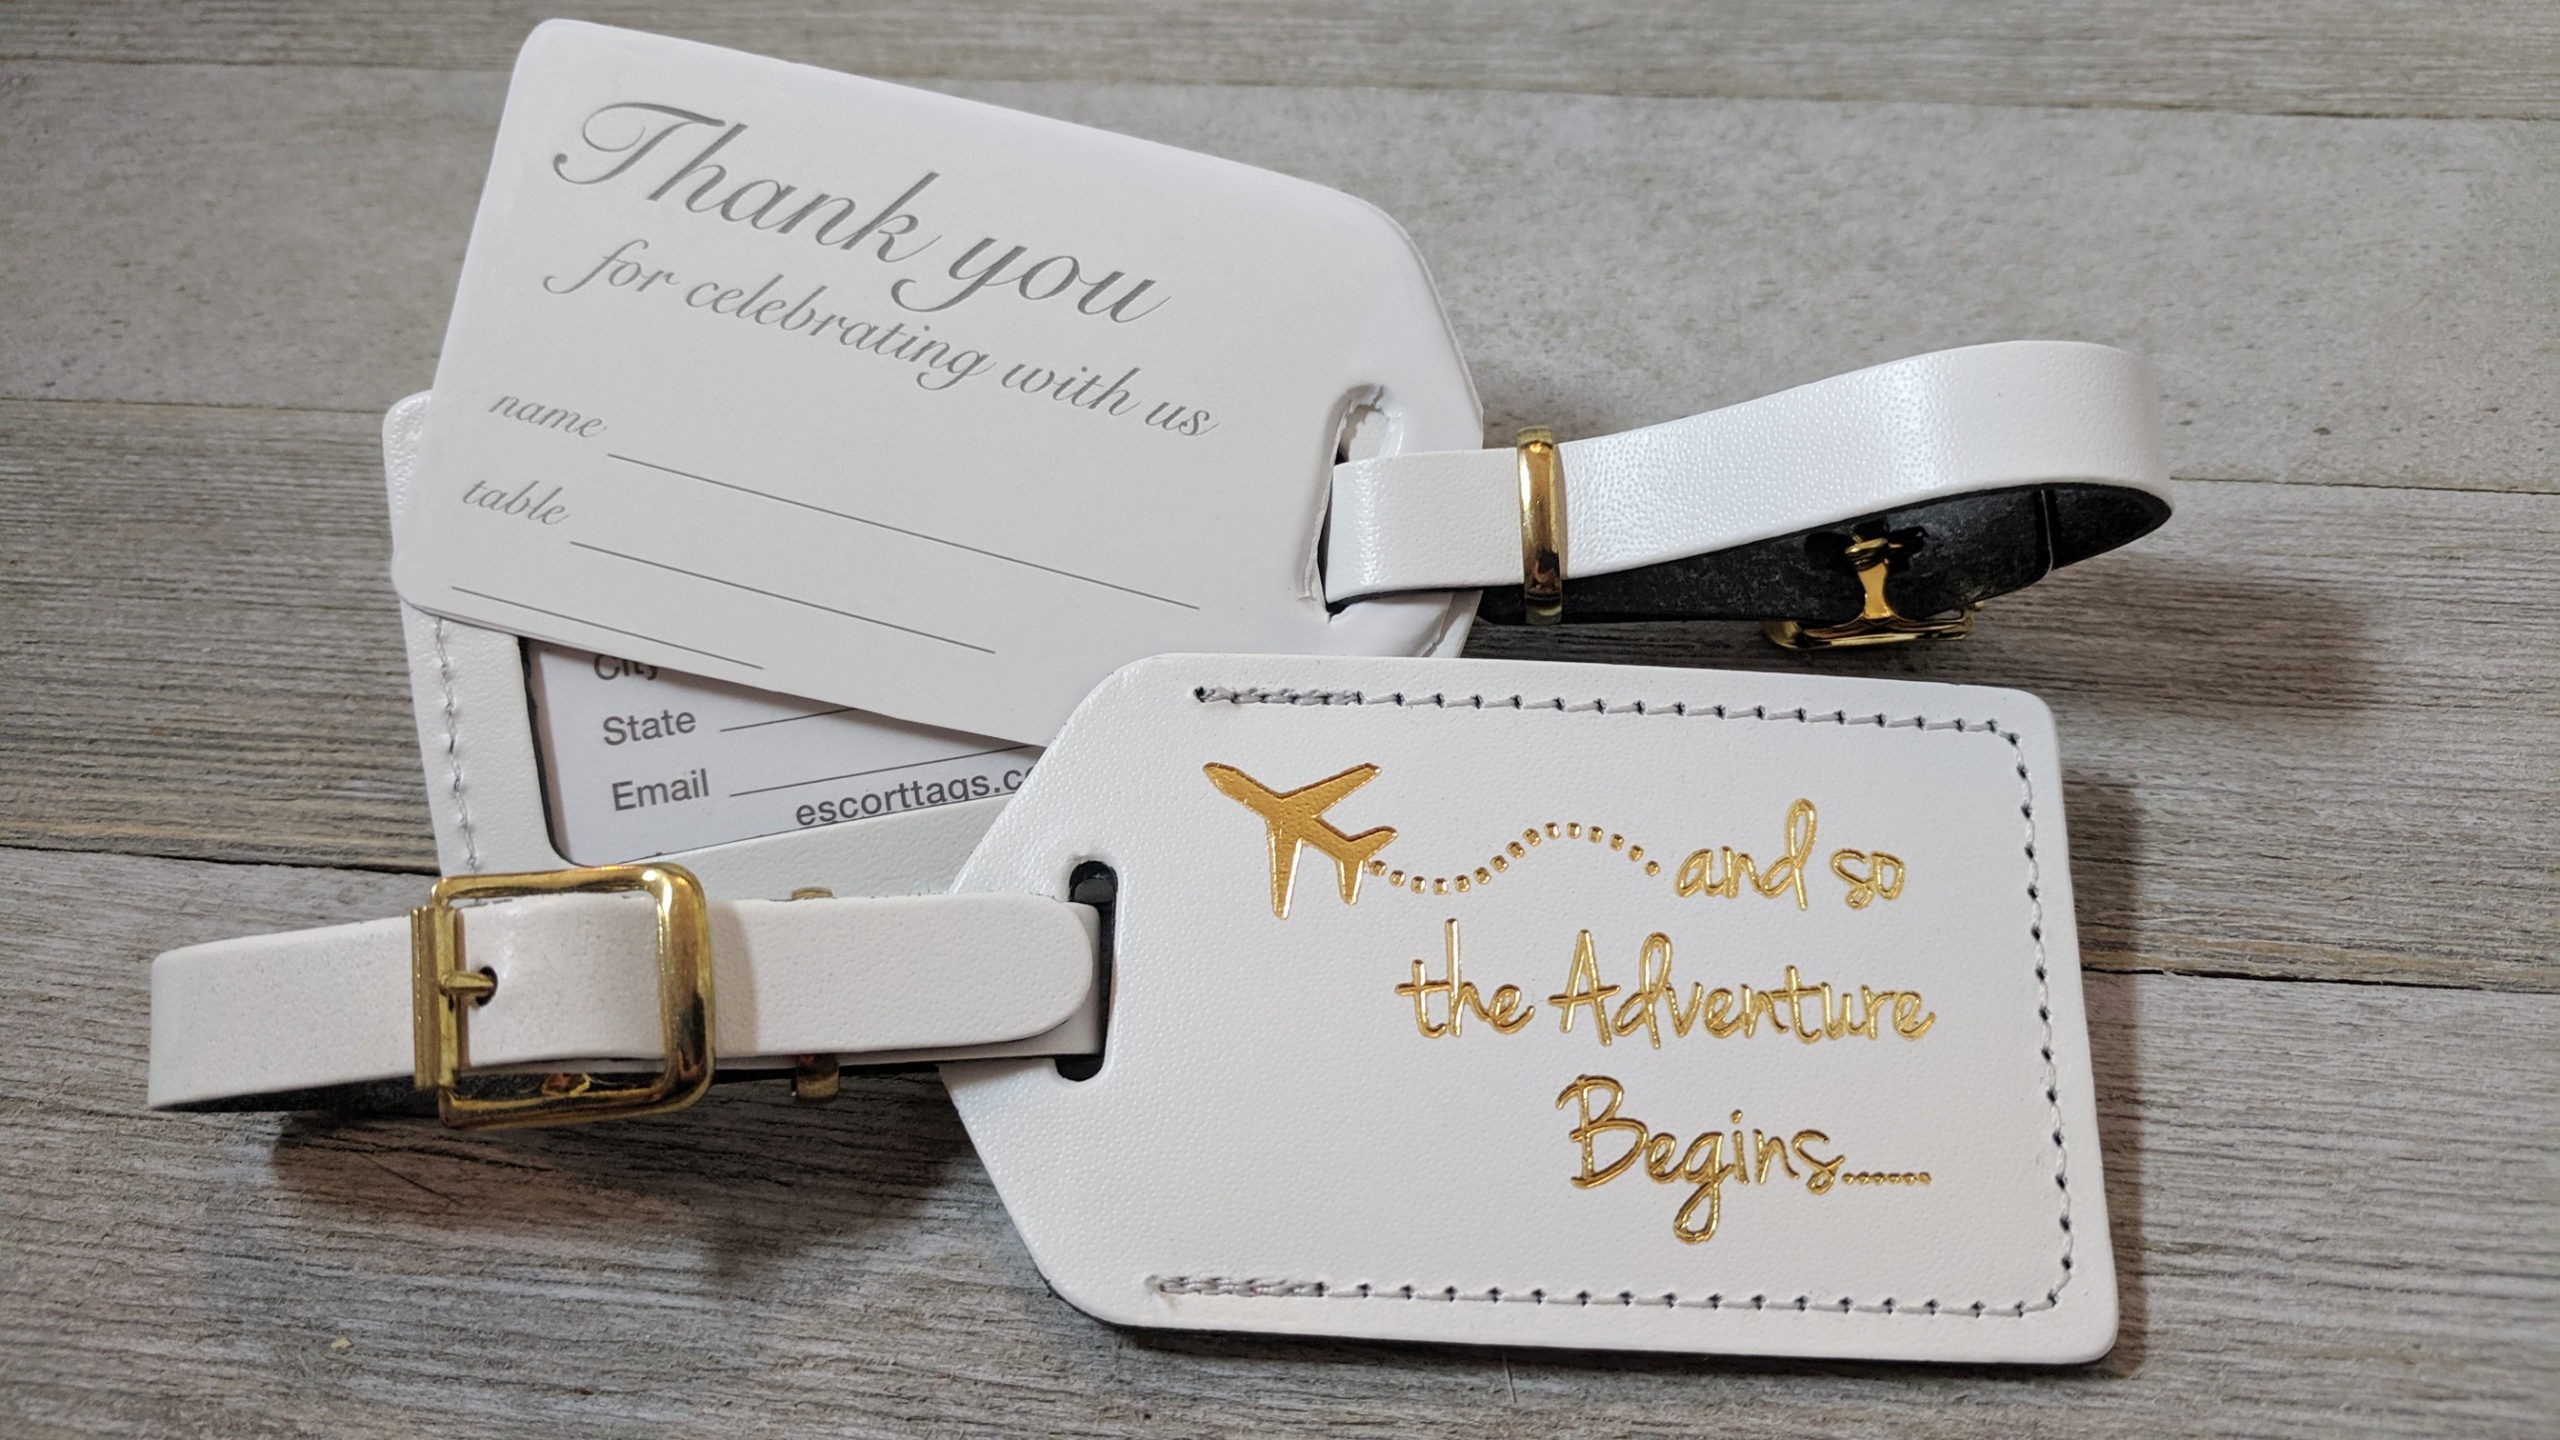  Luggage Tags for Suitcase PU Leather Travel Tags,Celebration  Pattern,Baggage Tag with Name Address Labels : Clothing, Shoes & Jewelry